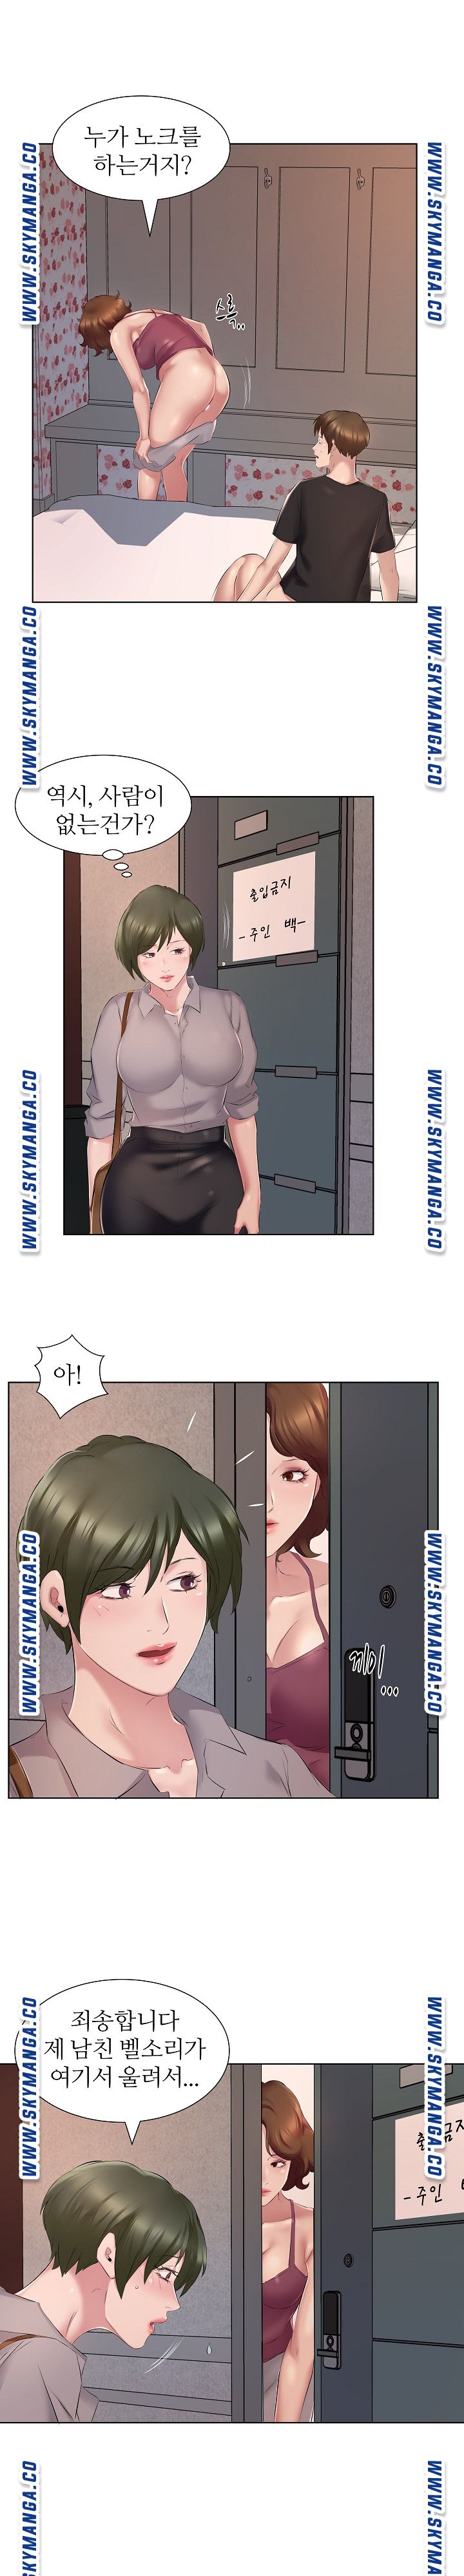 One Room Hotel Raw - Chapter 4 Page 14